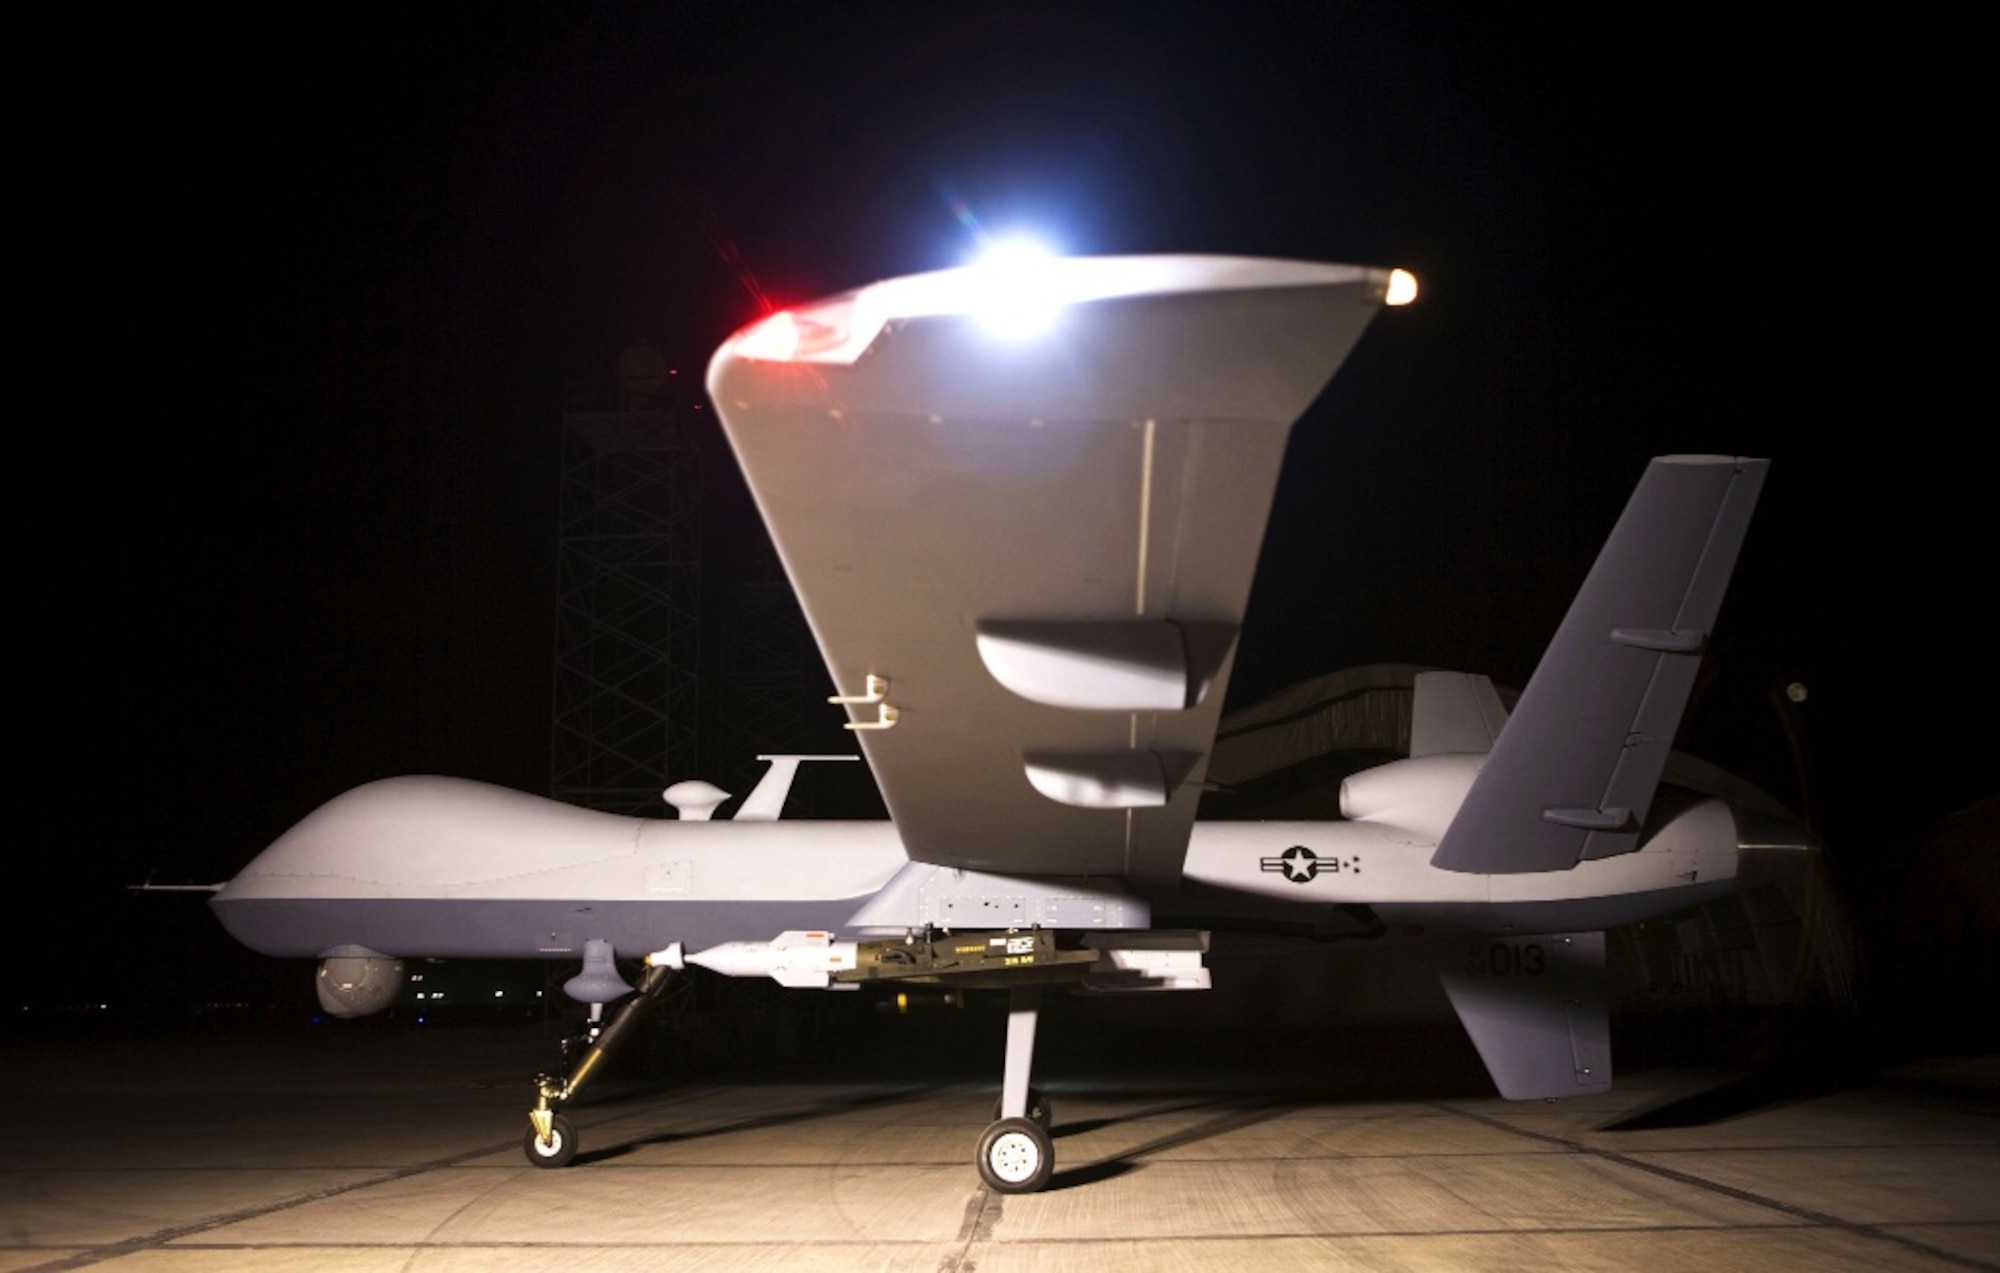 An MQ-9 Reaper remotely piloted aircraft sits on a ramp.  The Reaper is an armed, multi-mission, medium-altitude, long-endurance remotely piloted aircraft that is employed primarily as an intelligence-collection asset and secondarily against dynamic execution targets.  (Photo courtesy of U.S. Air Force)